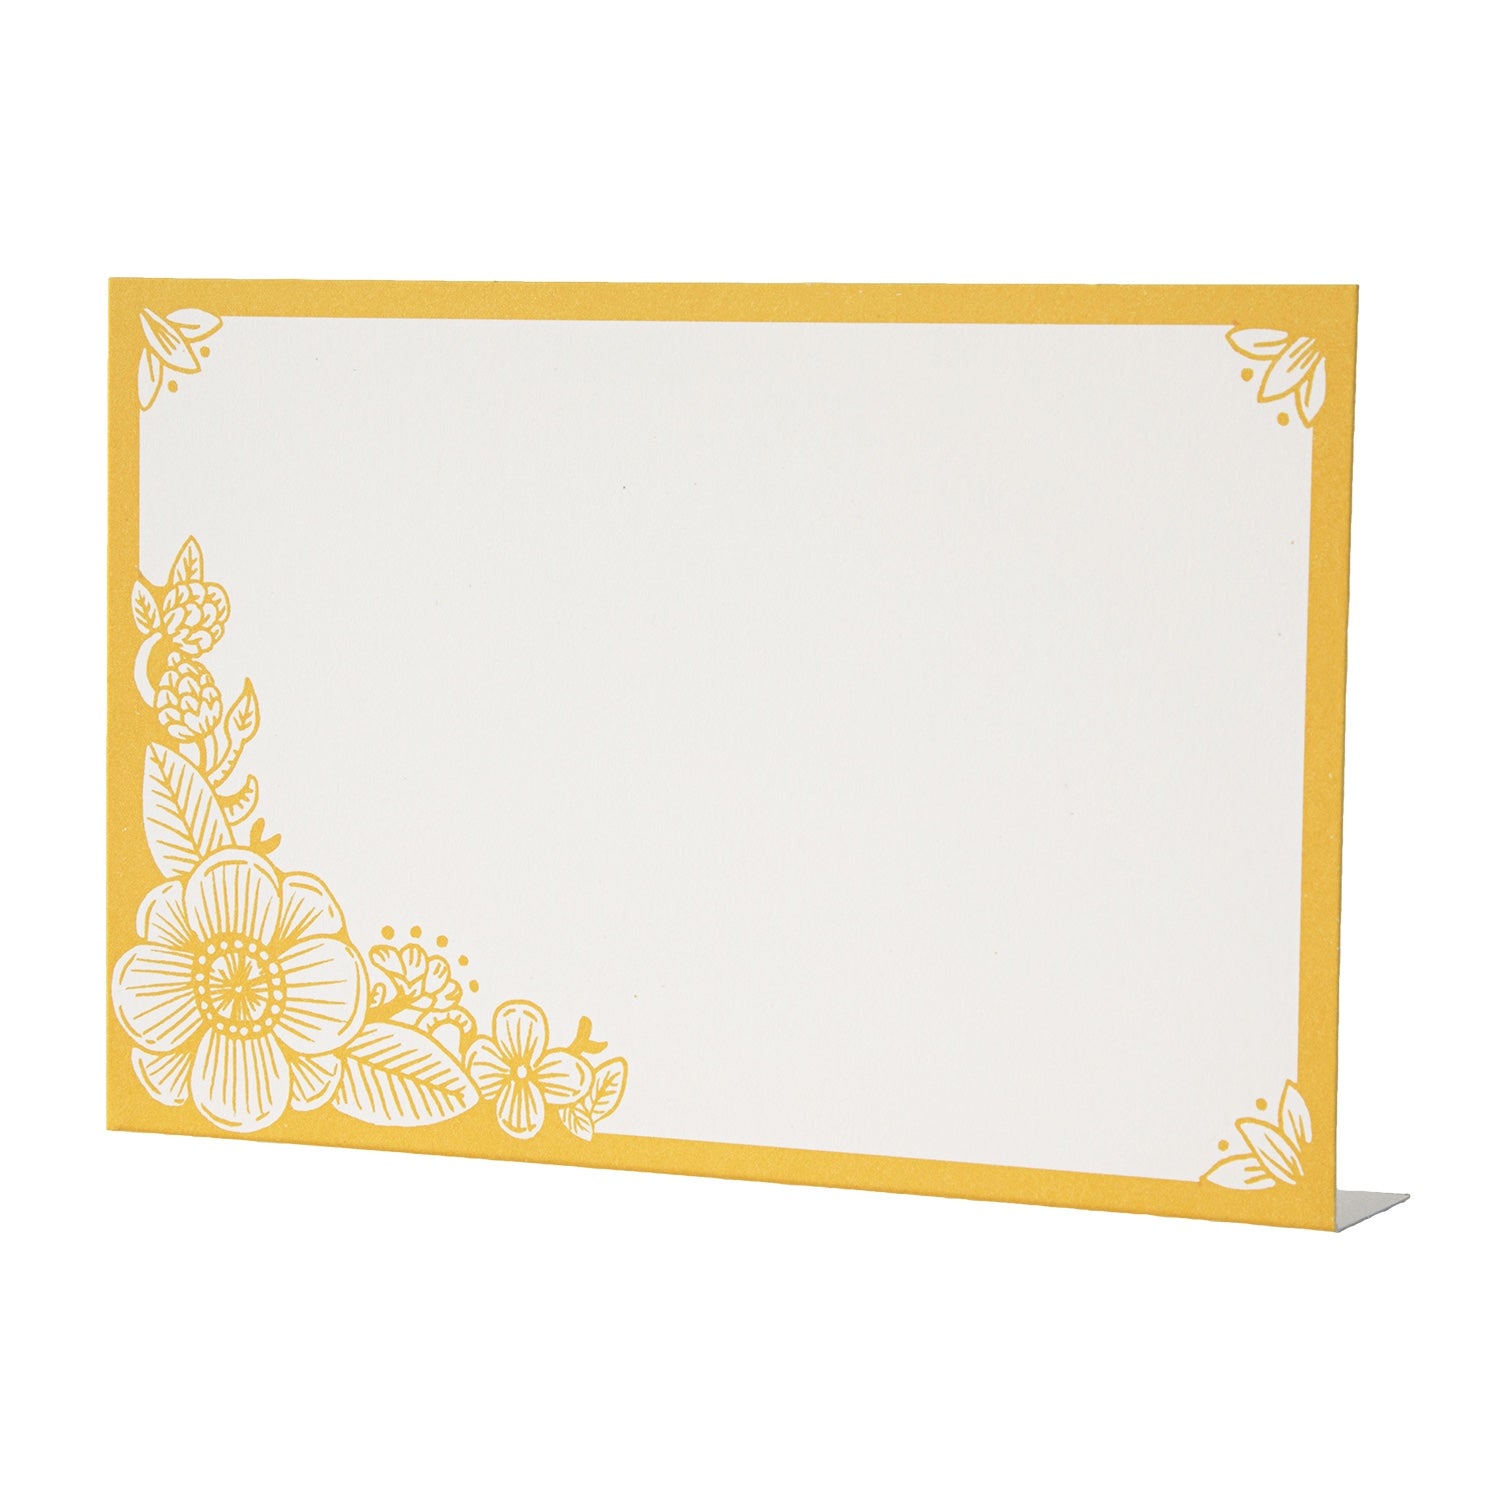 A free-standing, rectangular white table card with a marigold yellow frame around the edges, embellished with yellow linework flower designs in the corners.